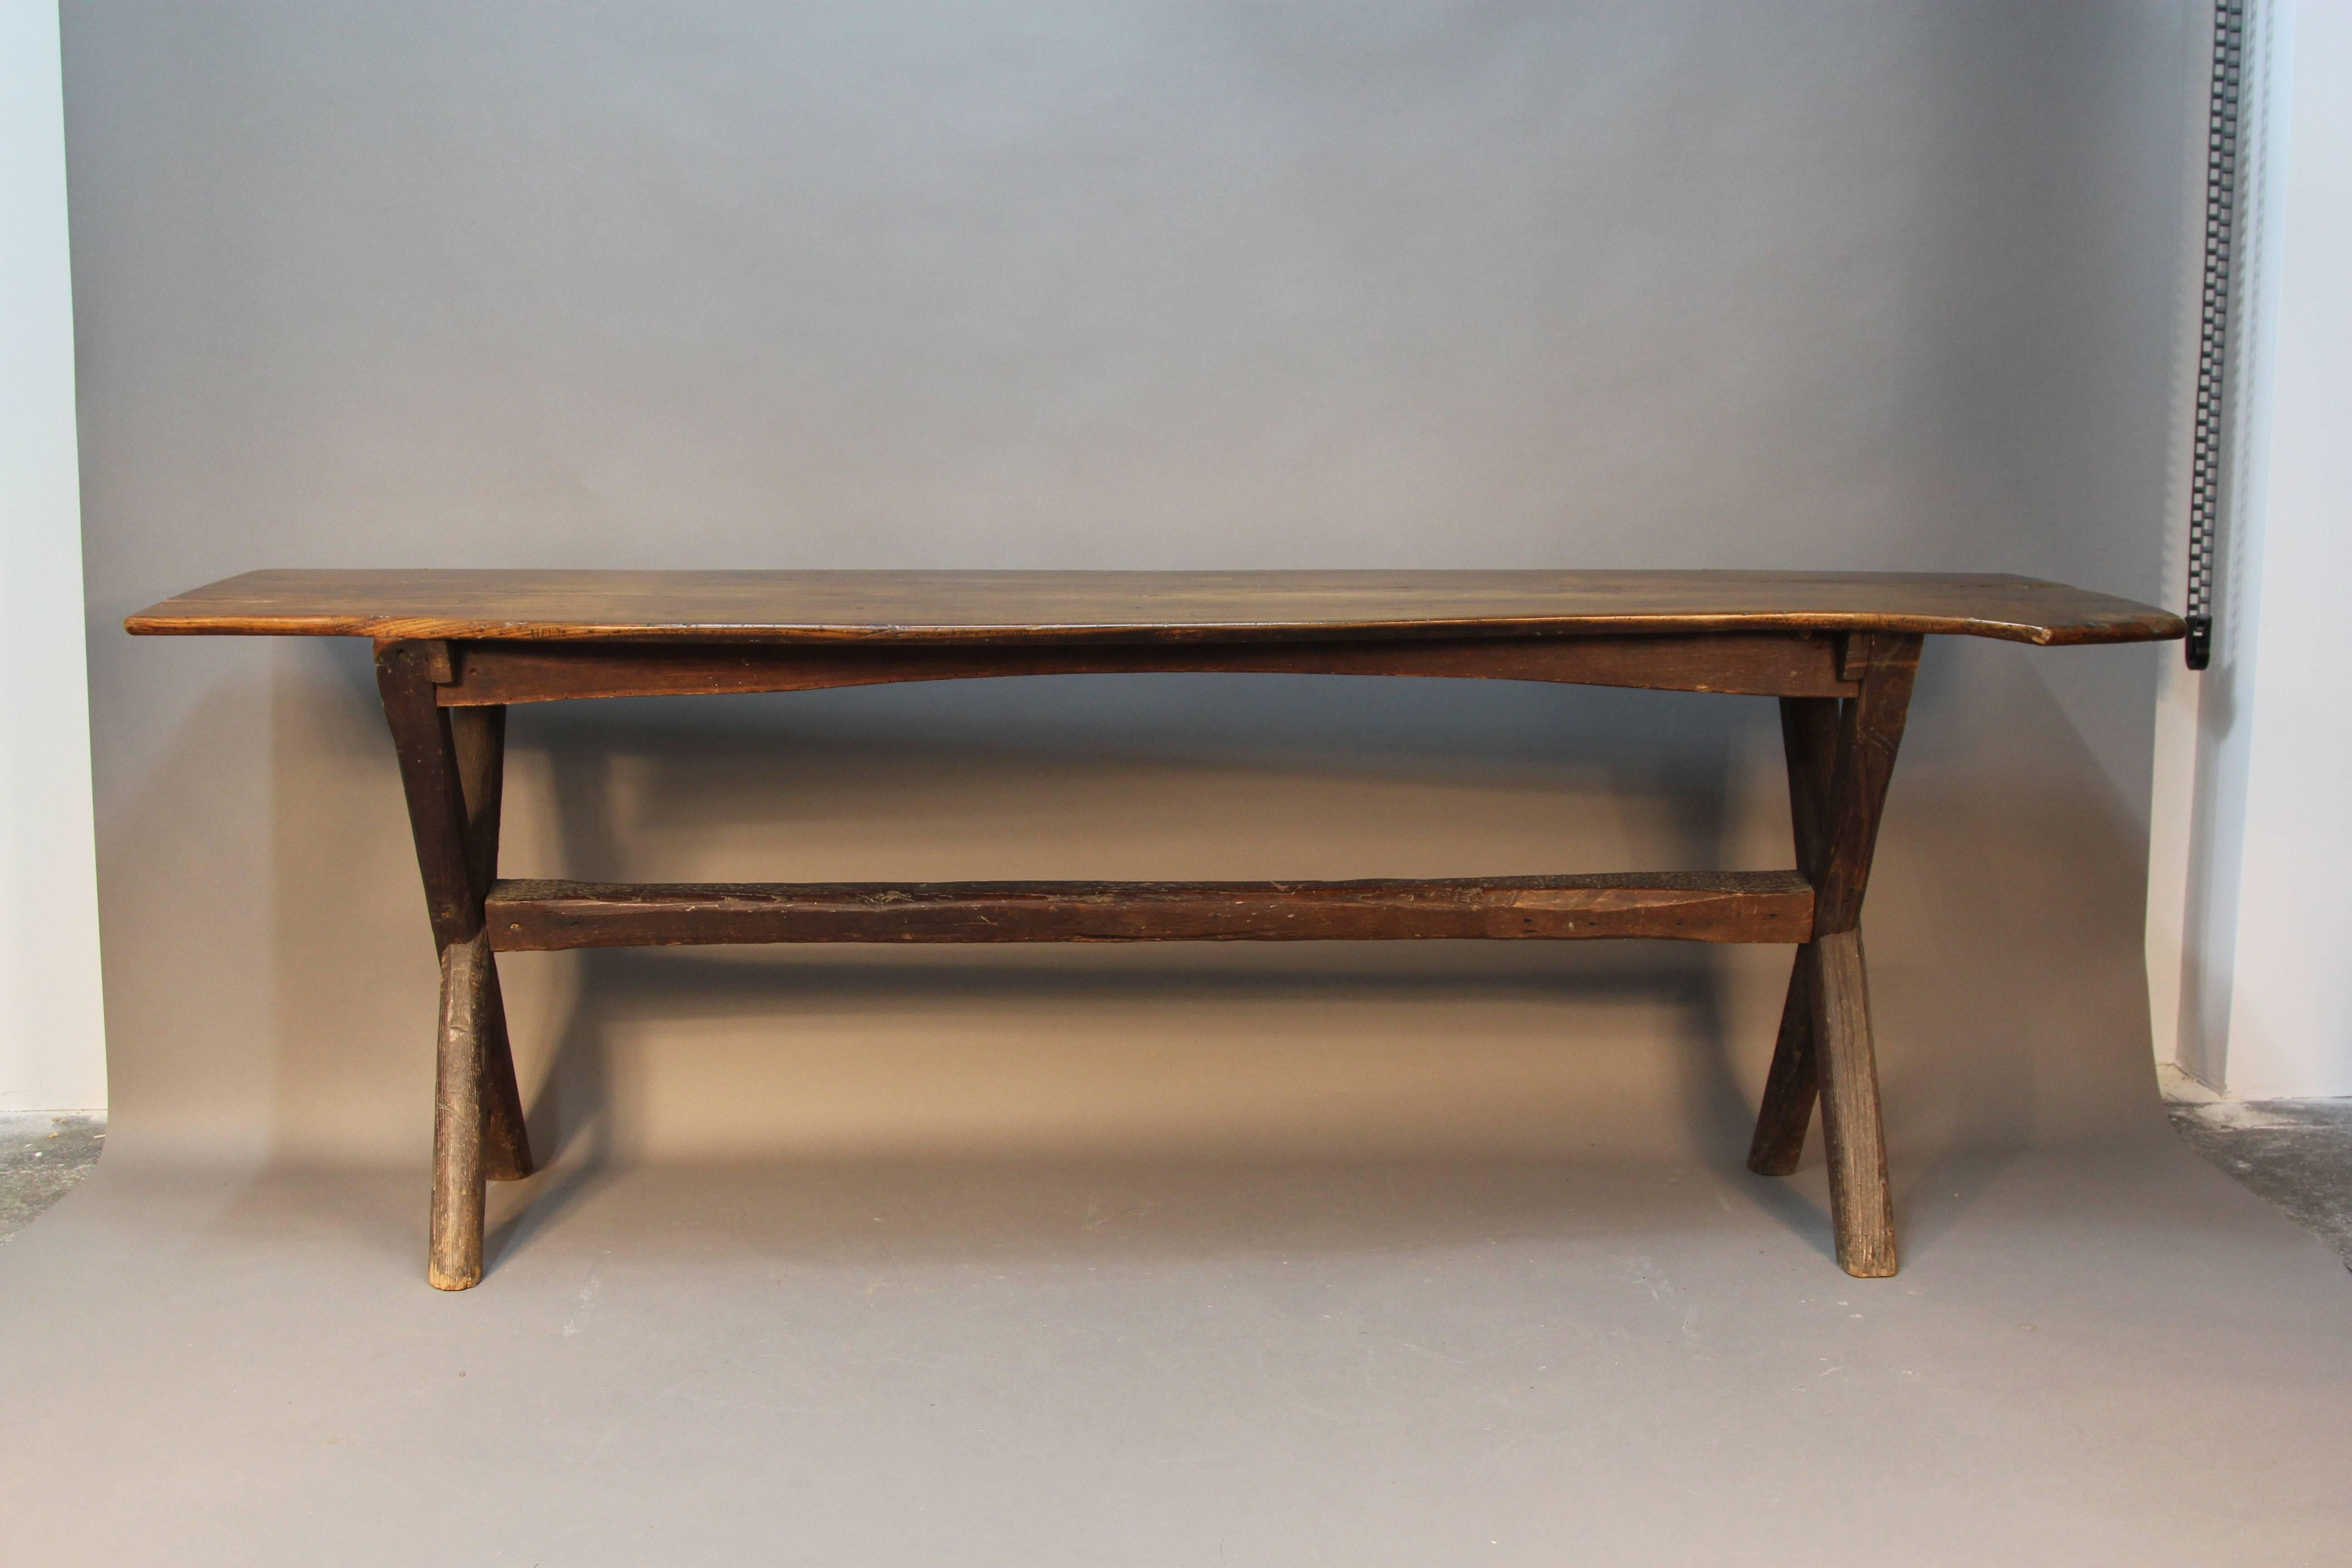 Antique natural edge console table with sawbuck base. Artist made from Old Lyme Connecticut.